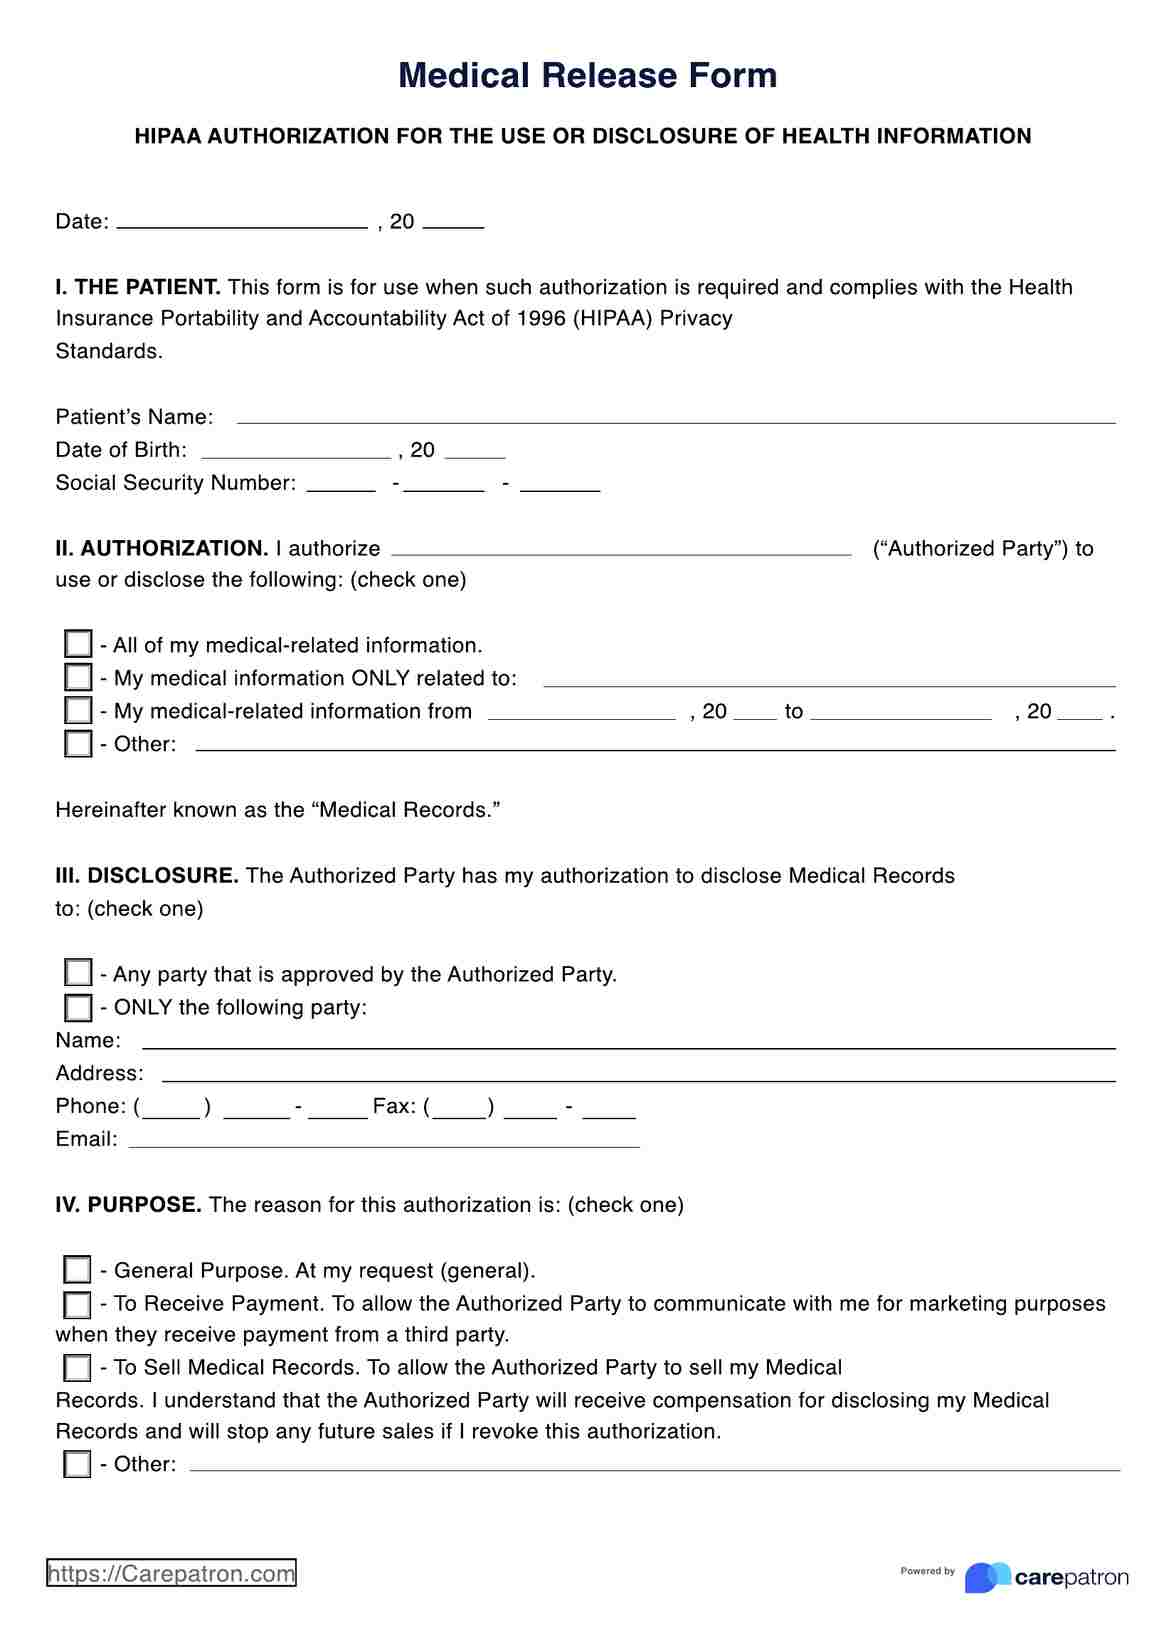 Medical Release Form PDF Example